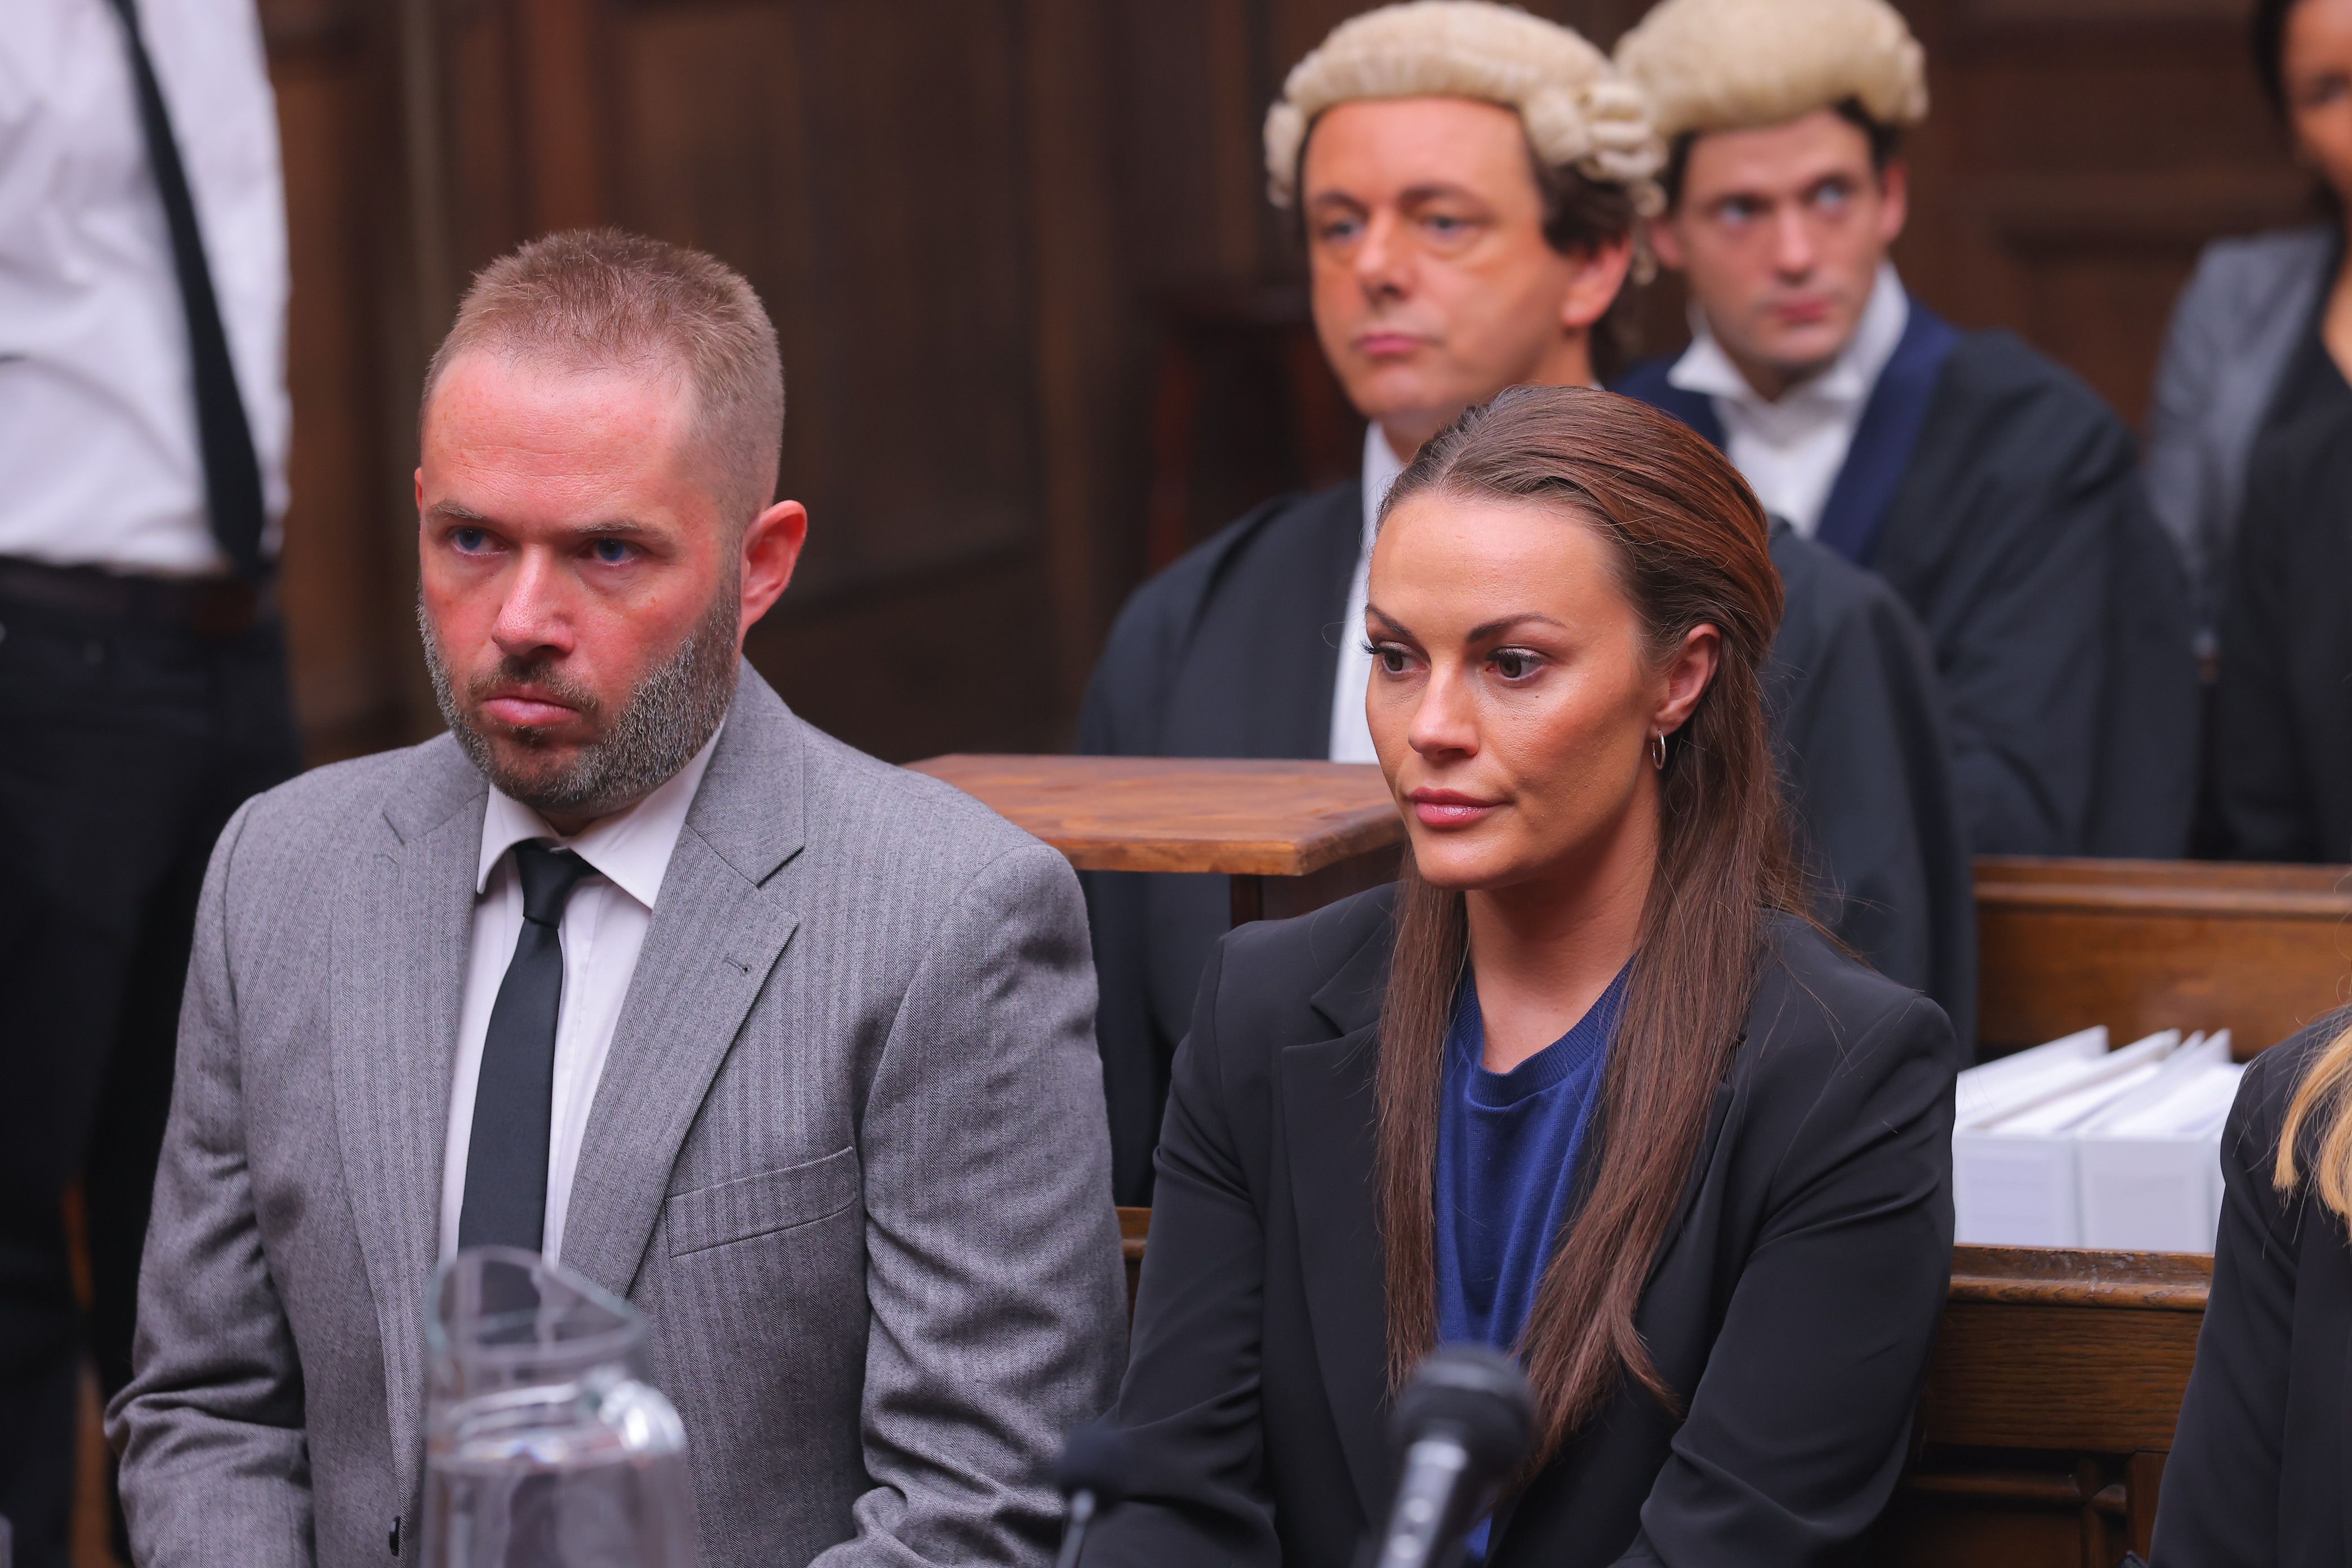 Vardy V Rooney: A Courtroom Drama - Wayne Rooney (DION LLYOYD) and Coleen Rooney (CHANEL CRESSWELL) Rebekah Vardy (NATALIA TENA) is represented by Hugh Tomlinson QC (SIMON COURY) V's Coleen Rooney (CHANEL CRESSWELL) represented by David Sherborne QC (MICHAEL SHEEN)